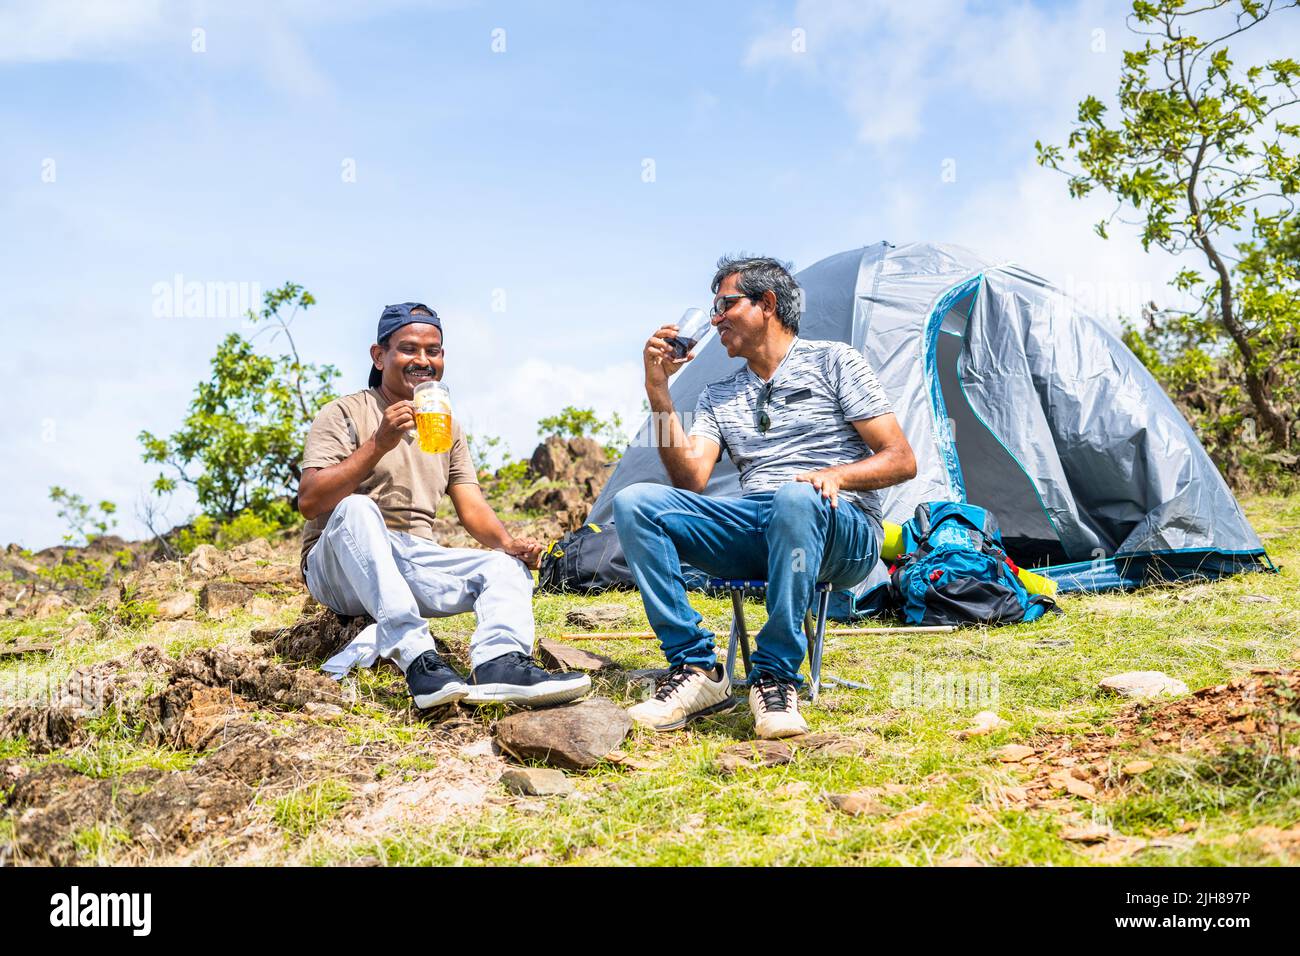 Happy smiling hikers having good time by drinking beer while talking each other in front of camping tent at hill - concept of friendship, vacations Stock Photo